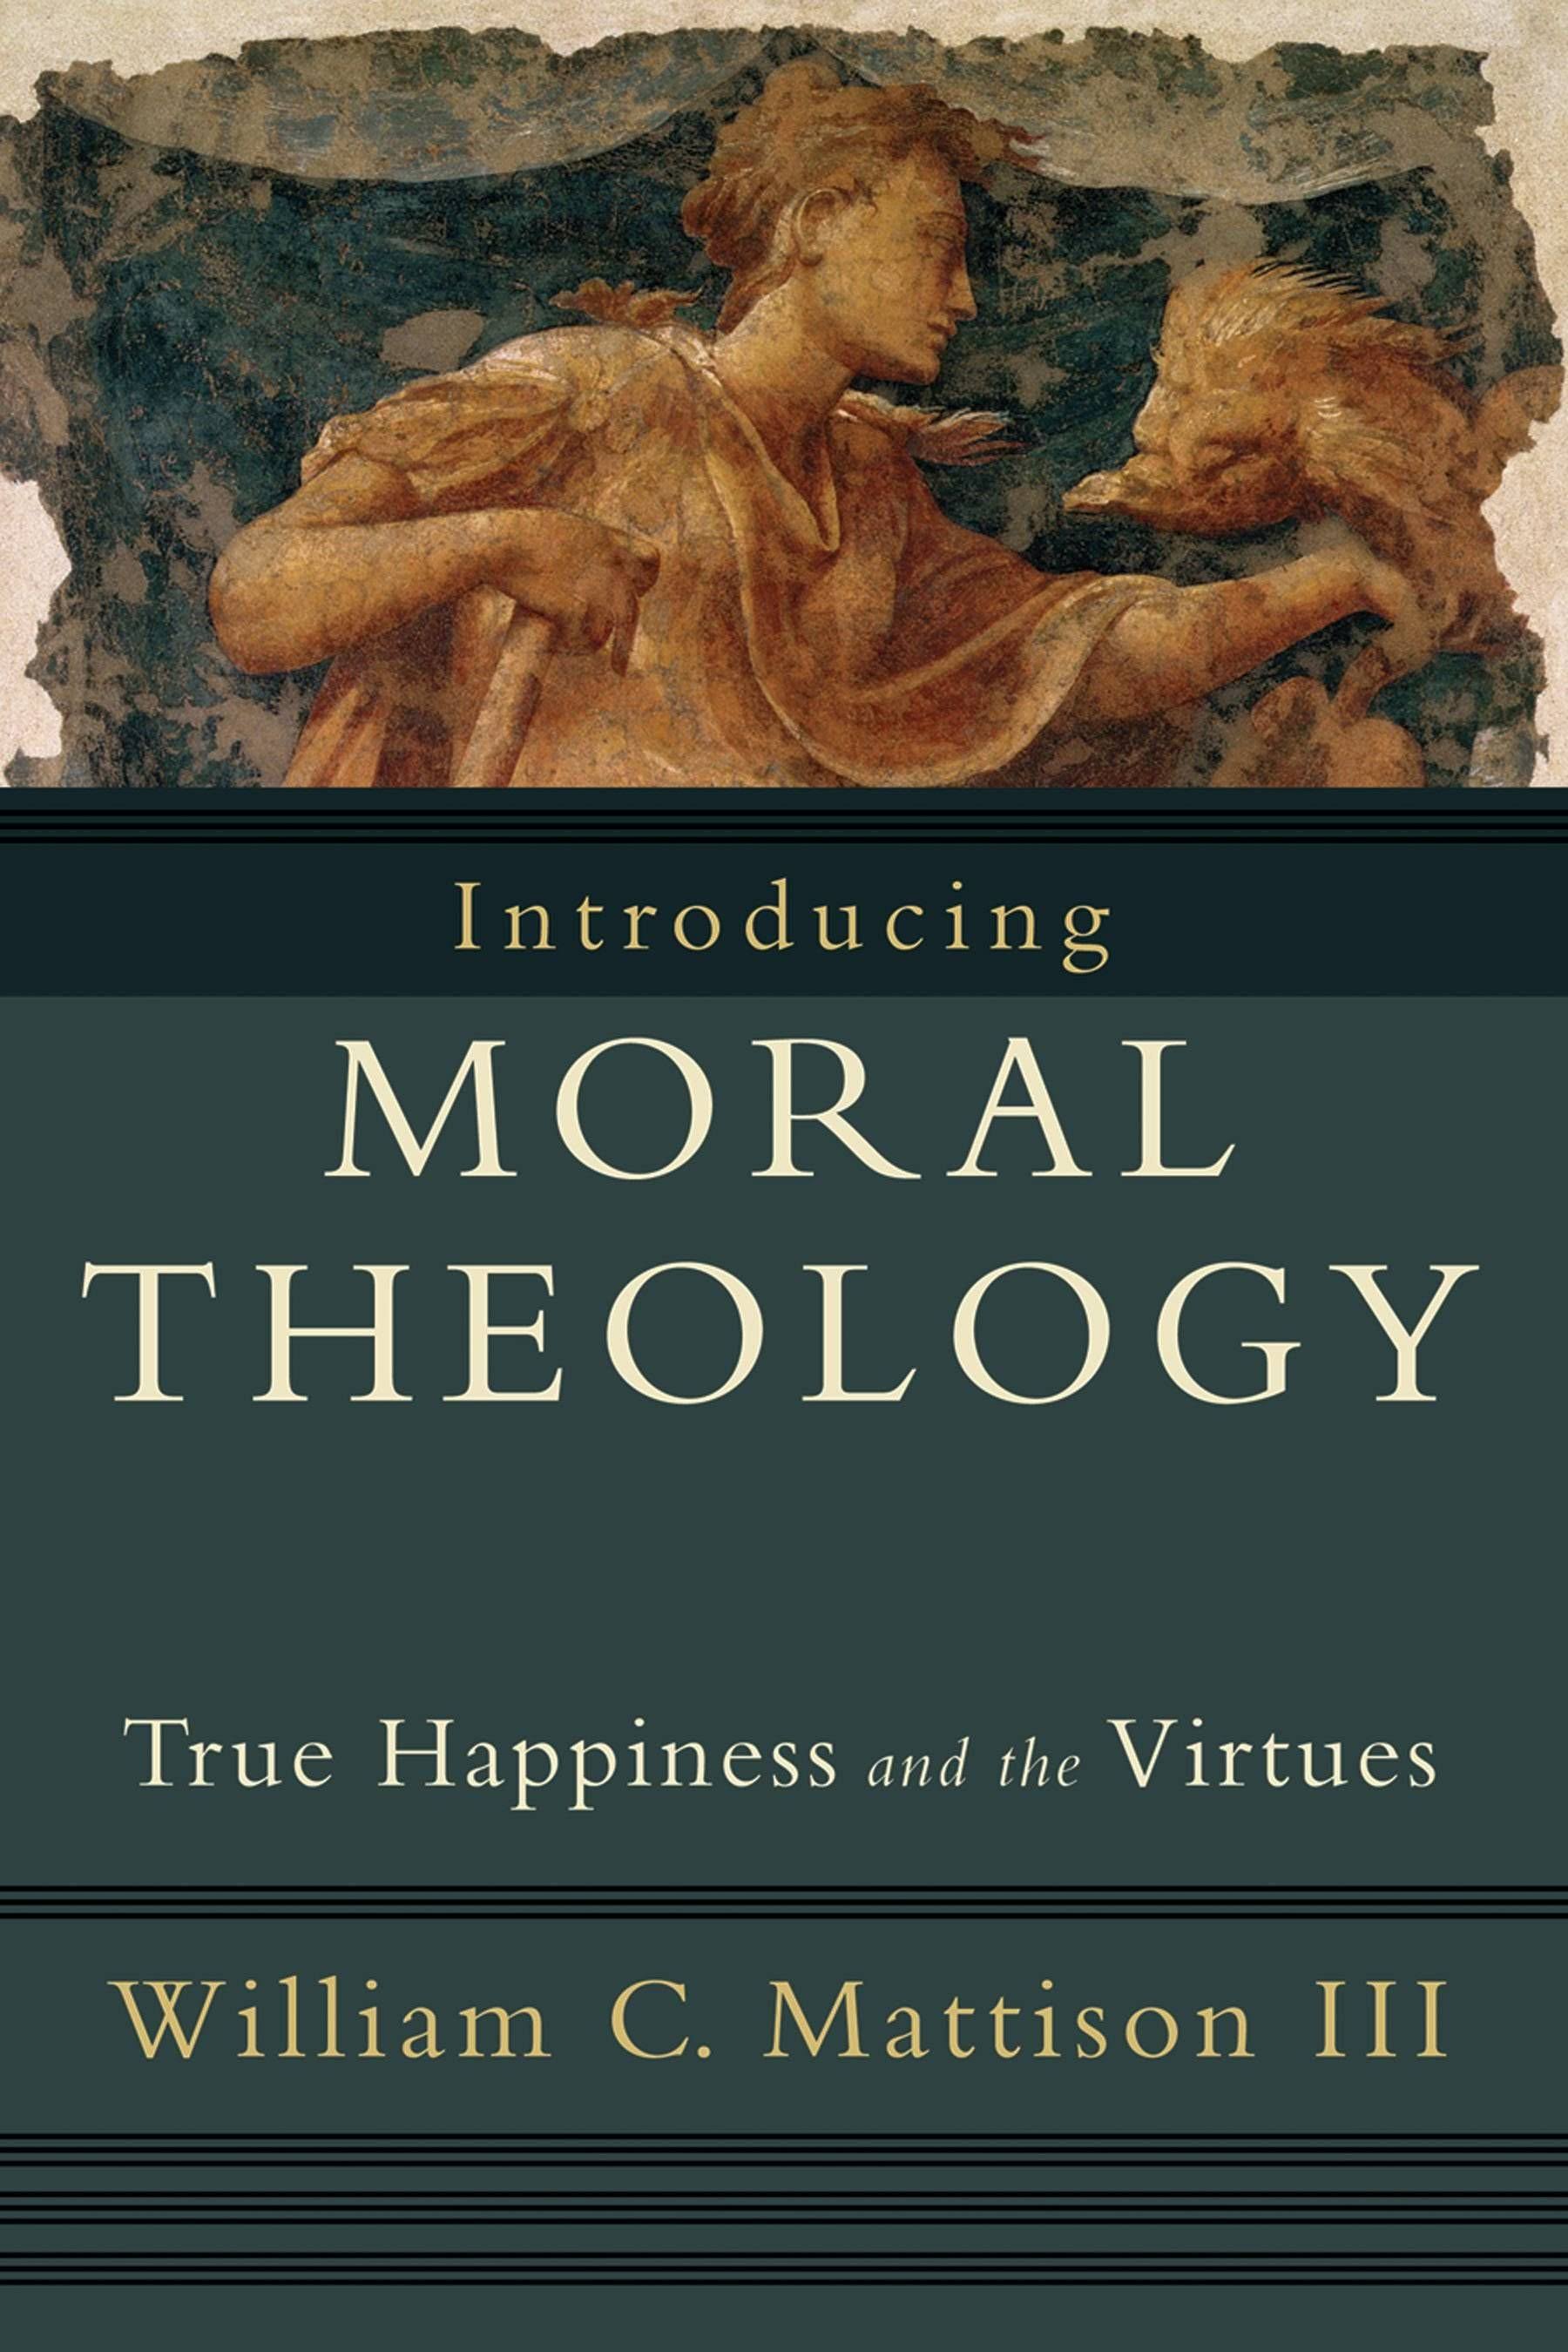 Introducing Moral Theology by William C. Mattison